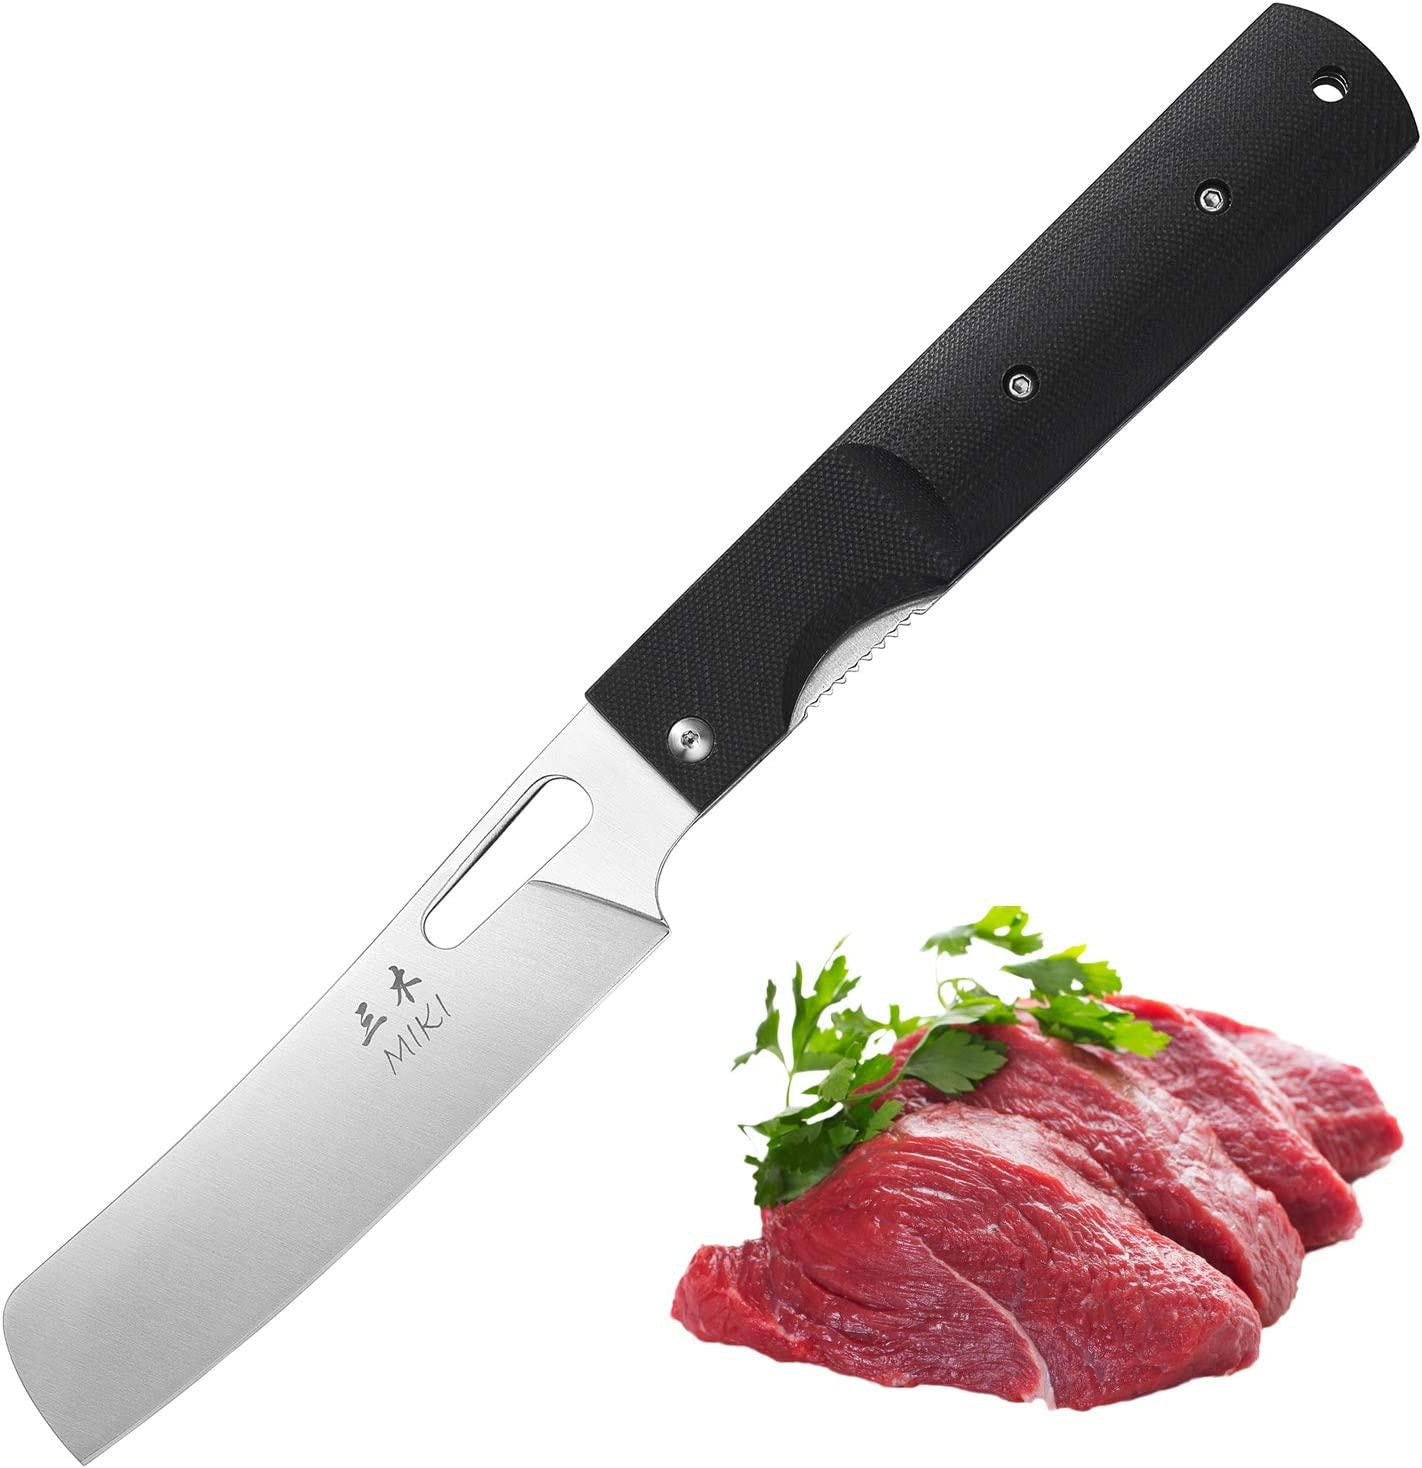 Miki, MIKI Sharp 440A Stainless Steel Blade Japanese Pocket Folding Kitchen Chef Knife Petty Knife Fruit Knife for Outdoor Camping Hunting Cooking